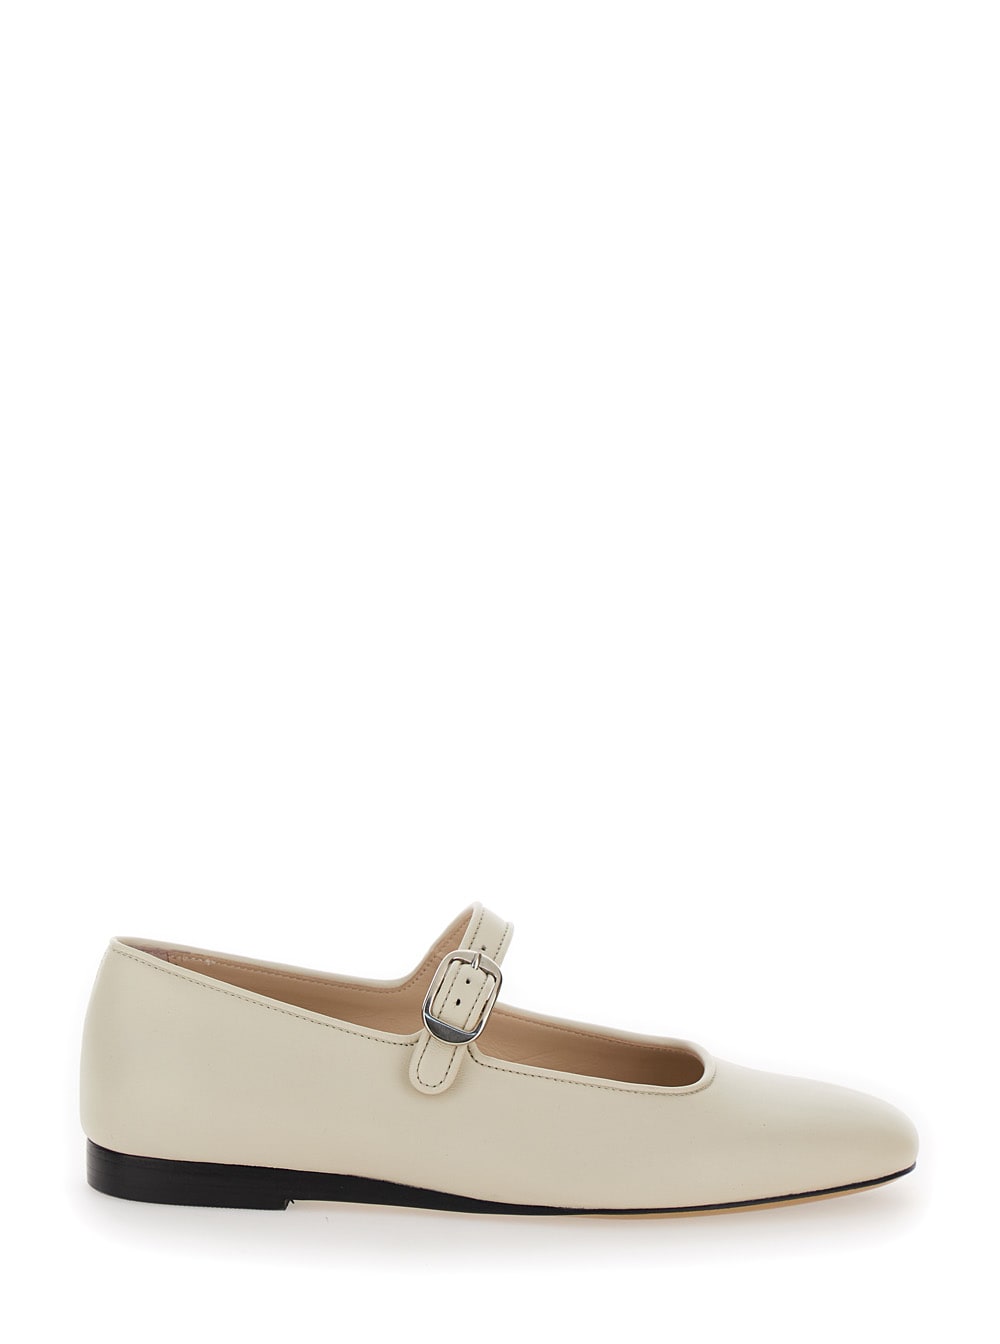 Shop Le Monde Beryl Off White Mary Jane With Strap In Leather Woman